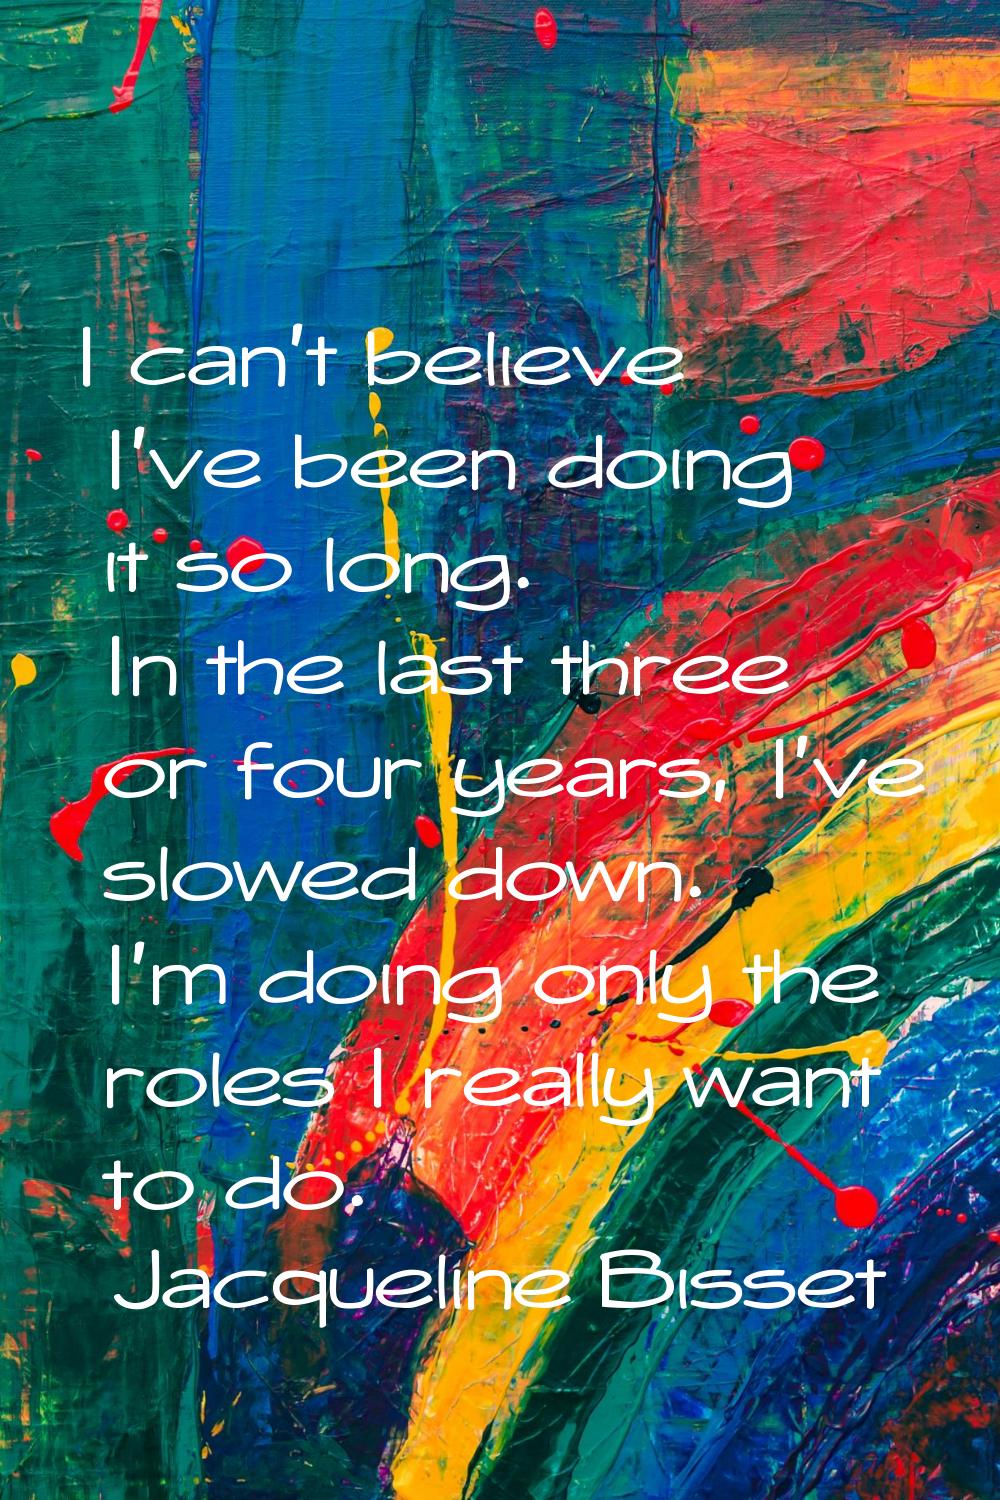 I can't believe I've been doing it so long. In the last three or four years, I've slowed down. I'm 